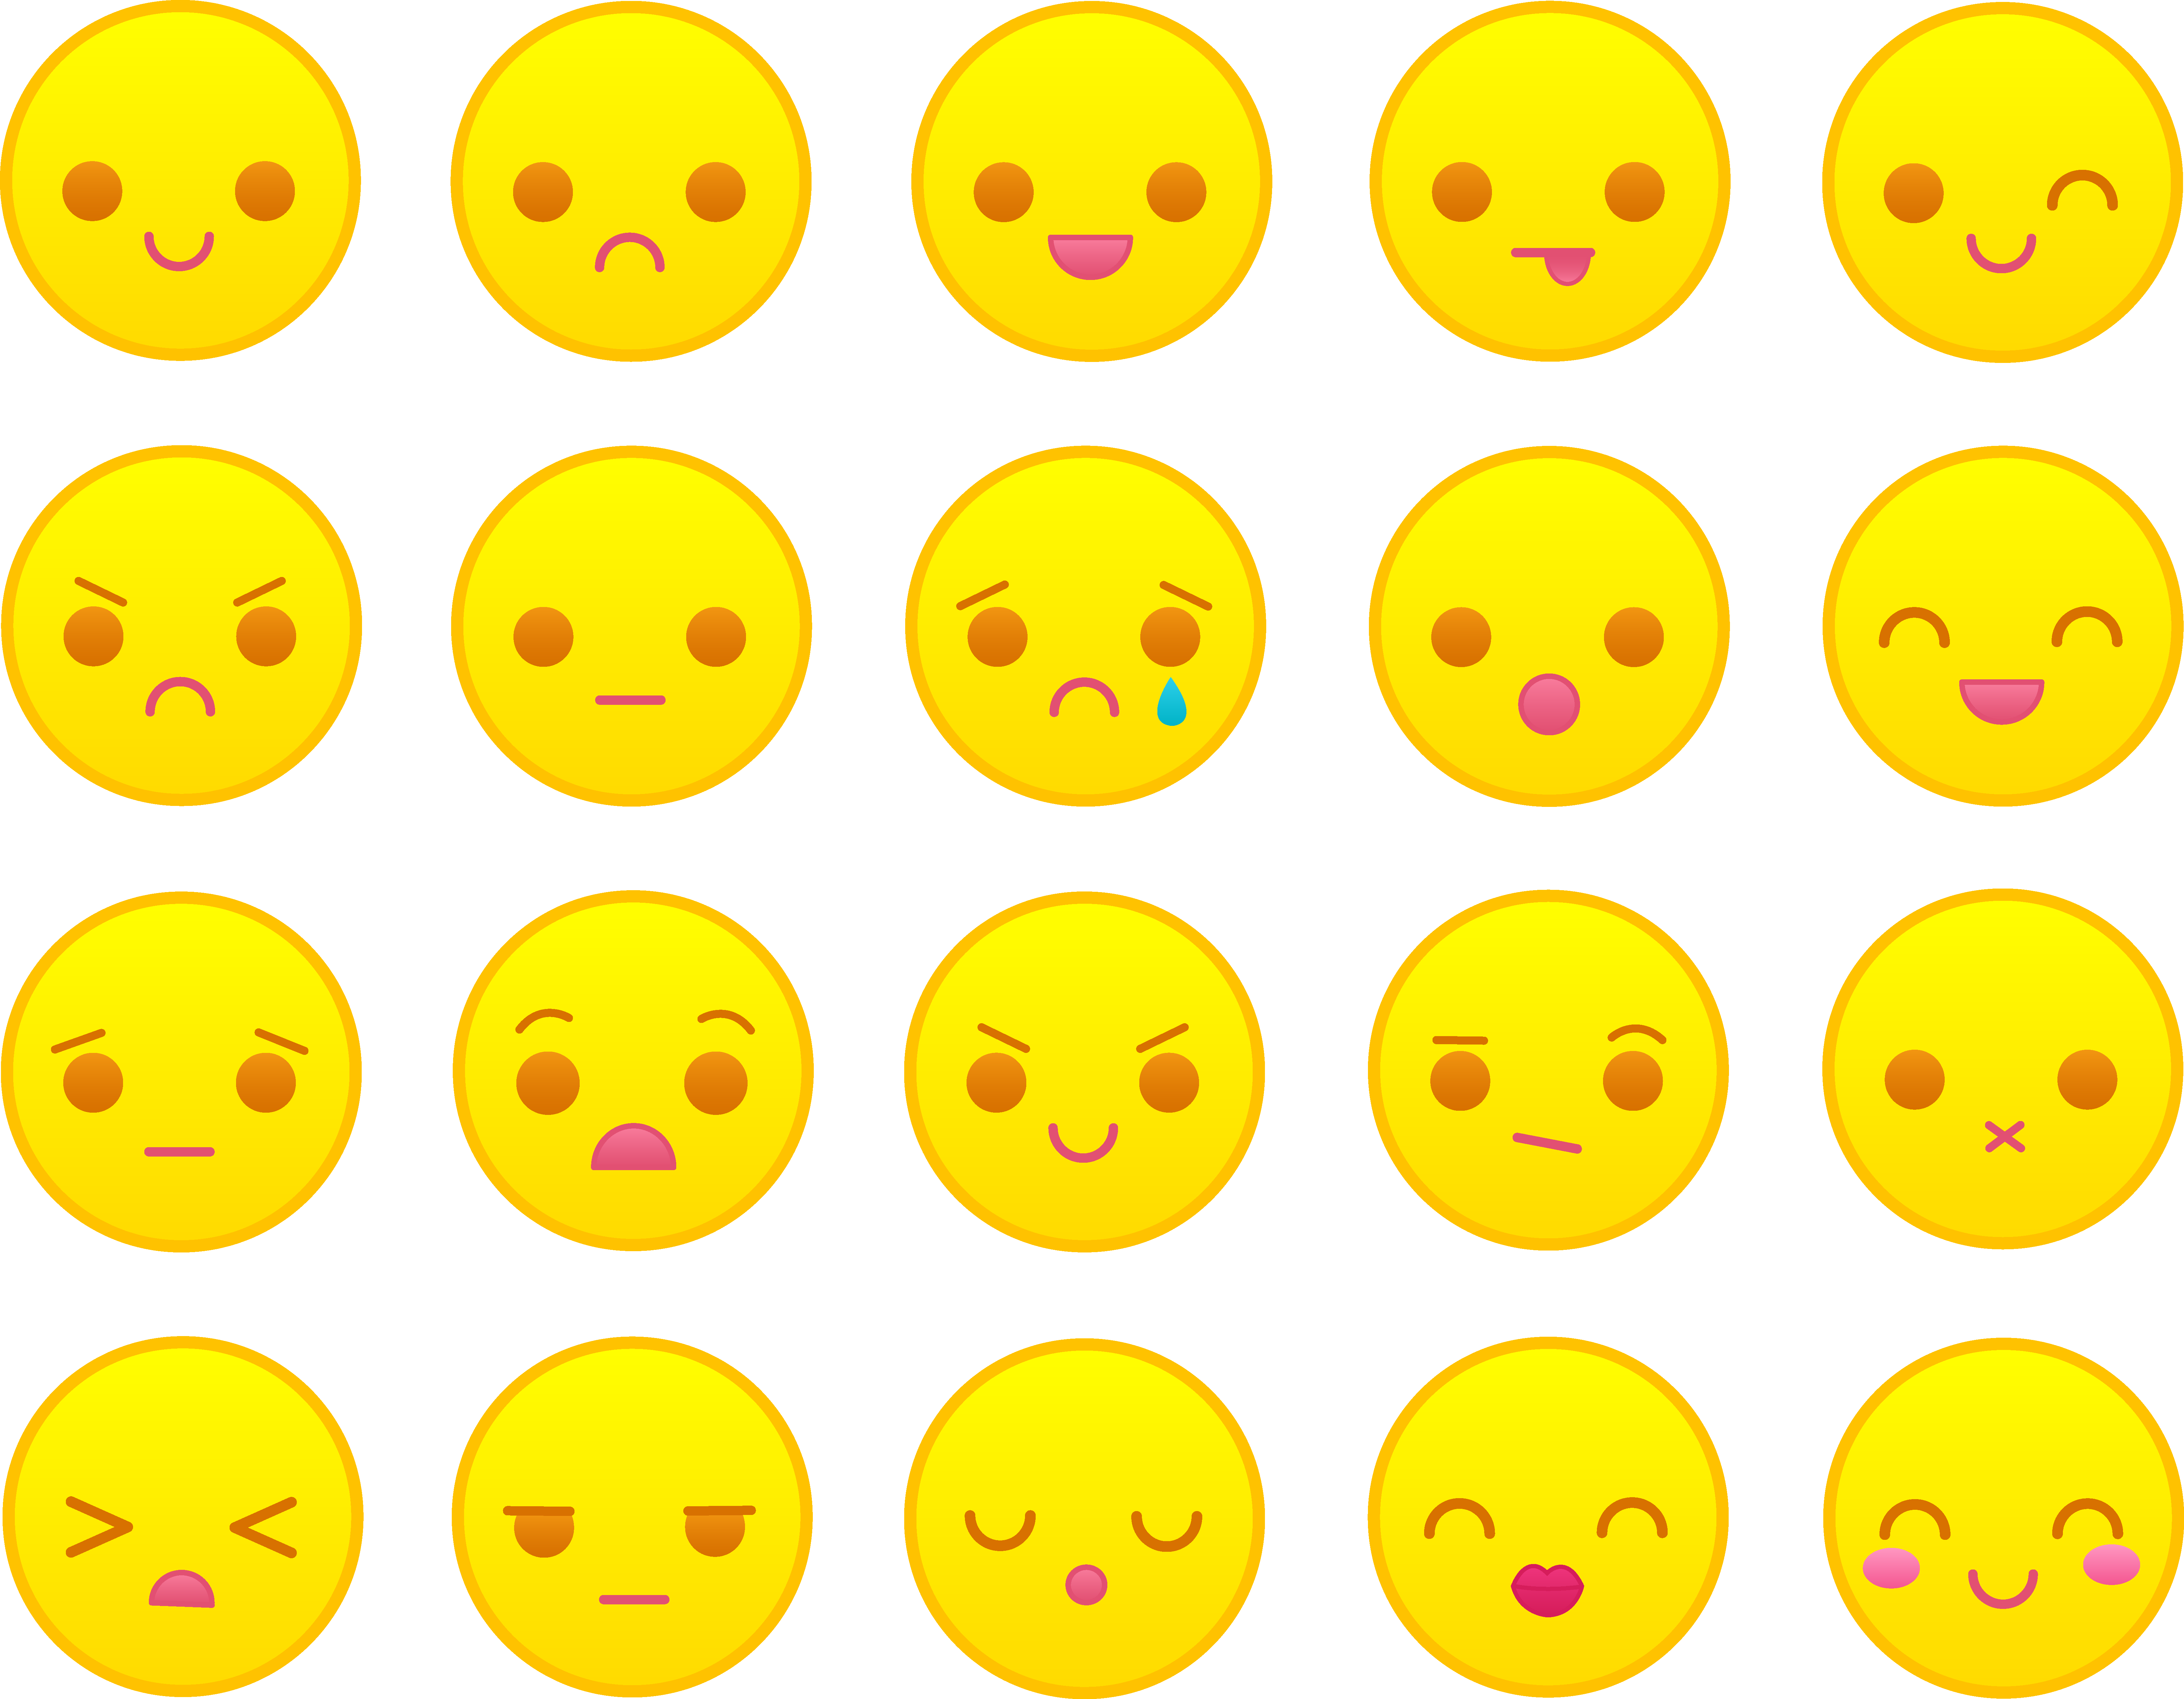 15 Yellow Smileys Emoticons Images